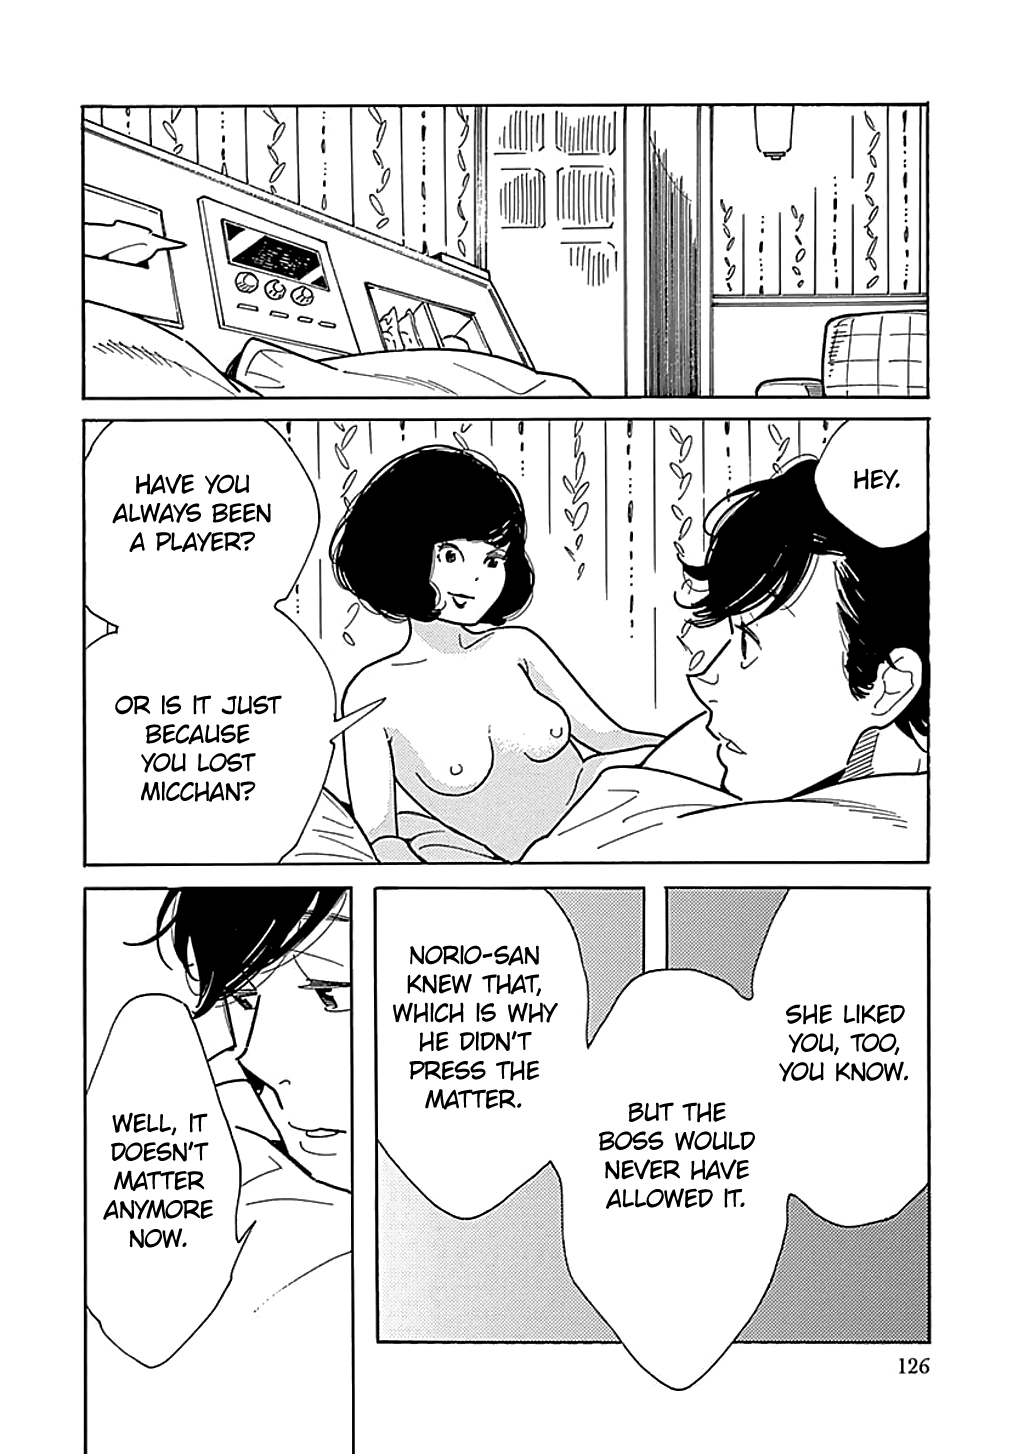 Musume no Iede Vol. 5 Ch. 29 I Want to Go Back to That Day